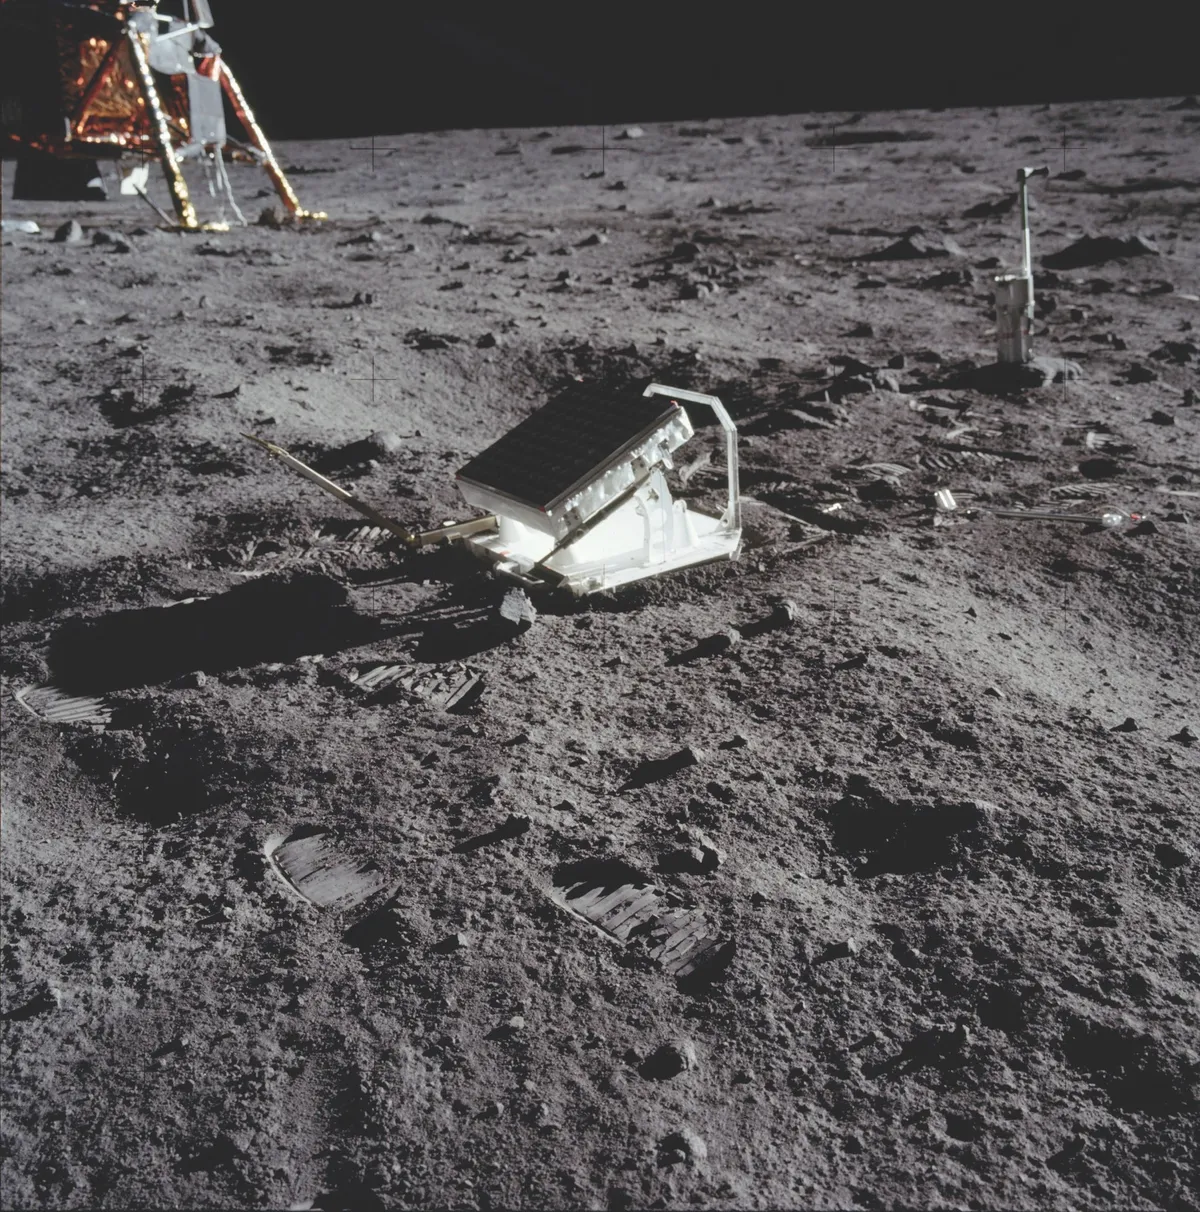 This first laser ranging reflector to be placed on the Moon was designed to monitor the distances between stations on Earth and the Apollo 11 landing site. The data has been used in studies of gravity, relativity and lunar geology. Made up of 100 small, fused silica cubes that reflect laser light directly back to its source, the reflector was placed about 14m from the lunar module. The first measurements were made at Lick Observatory on 1 August 1969 and are still being taken today. © NASA/JPL